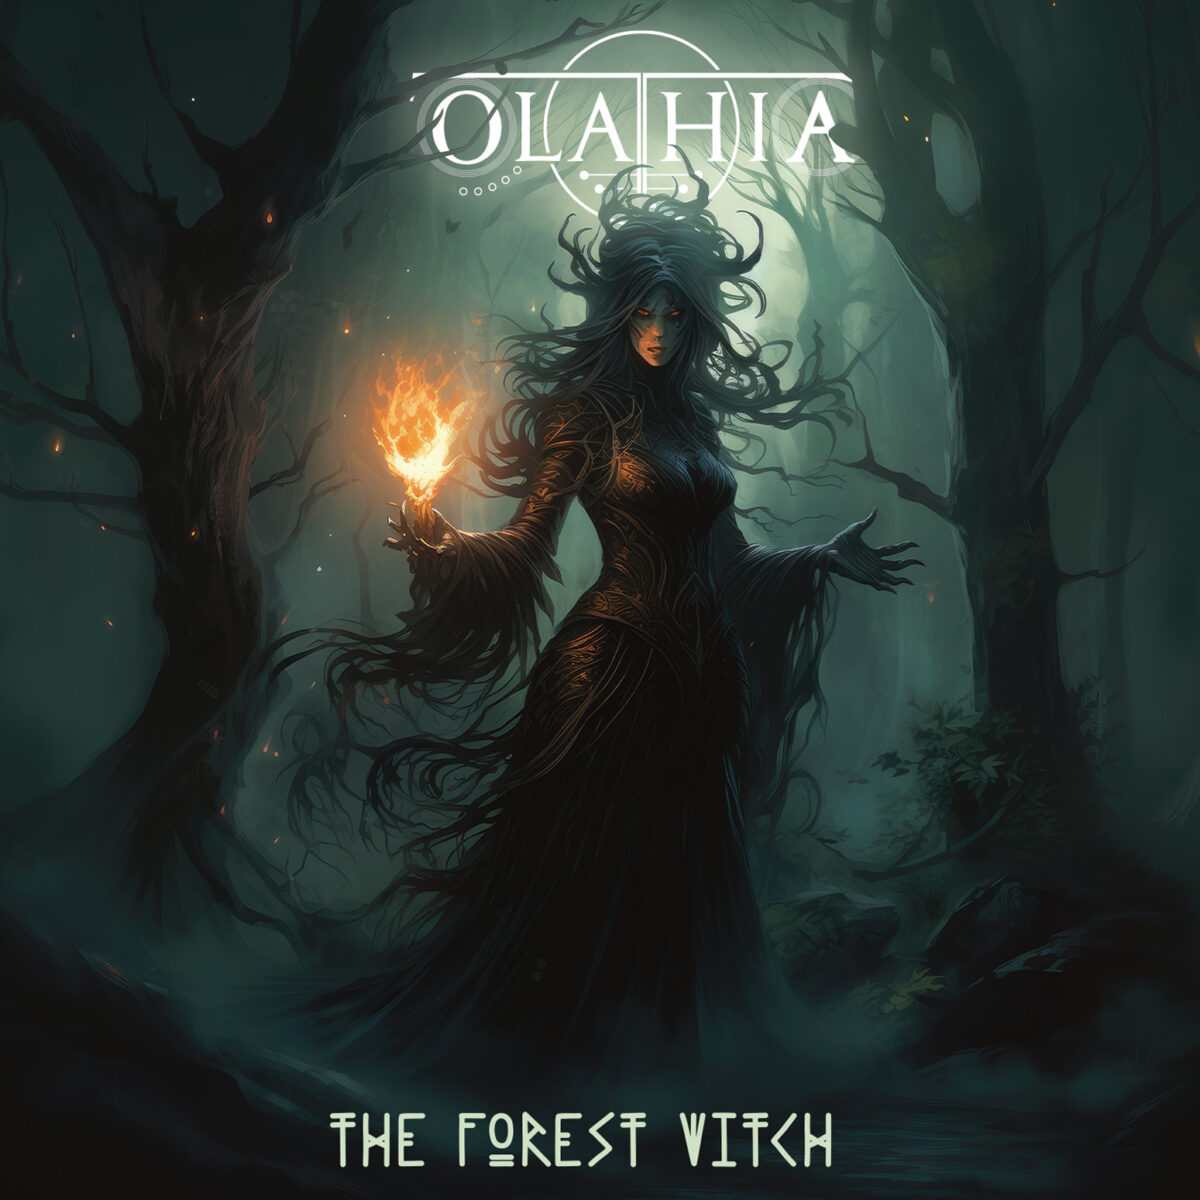 OLATHIA Released The Forest Witch On November 17th | Metalheads Forever ...